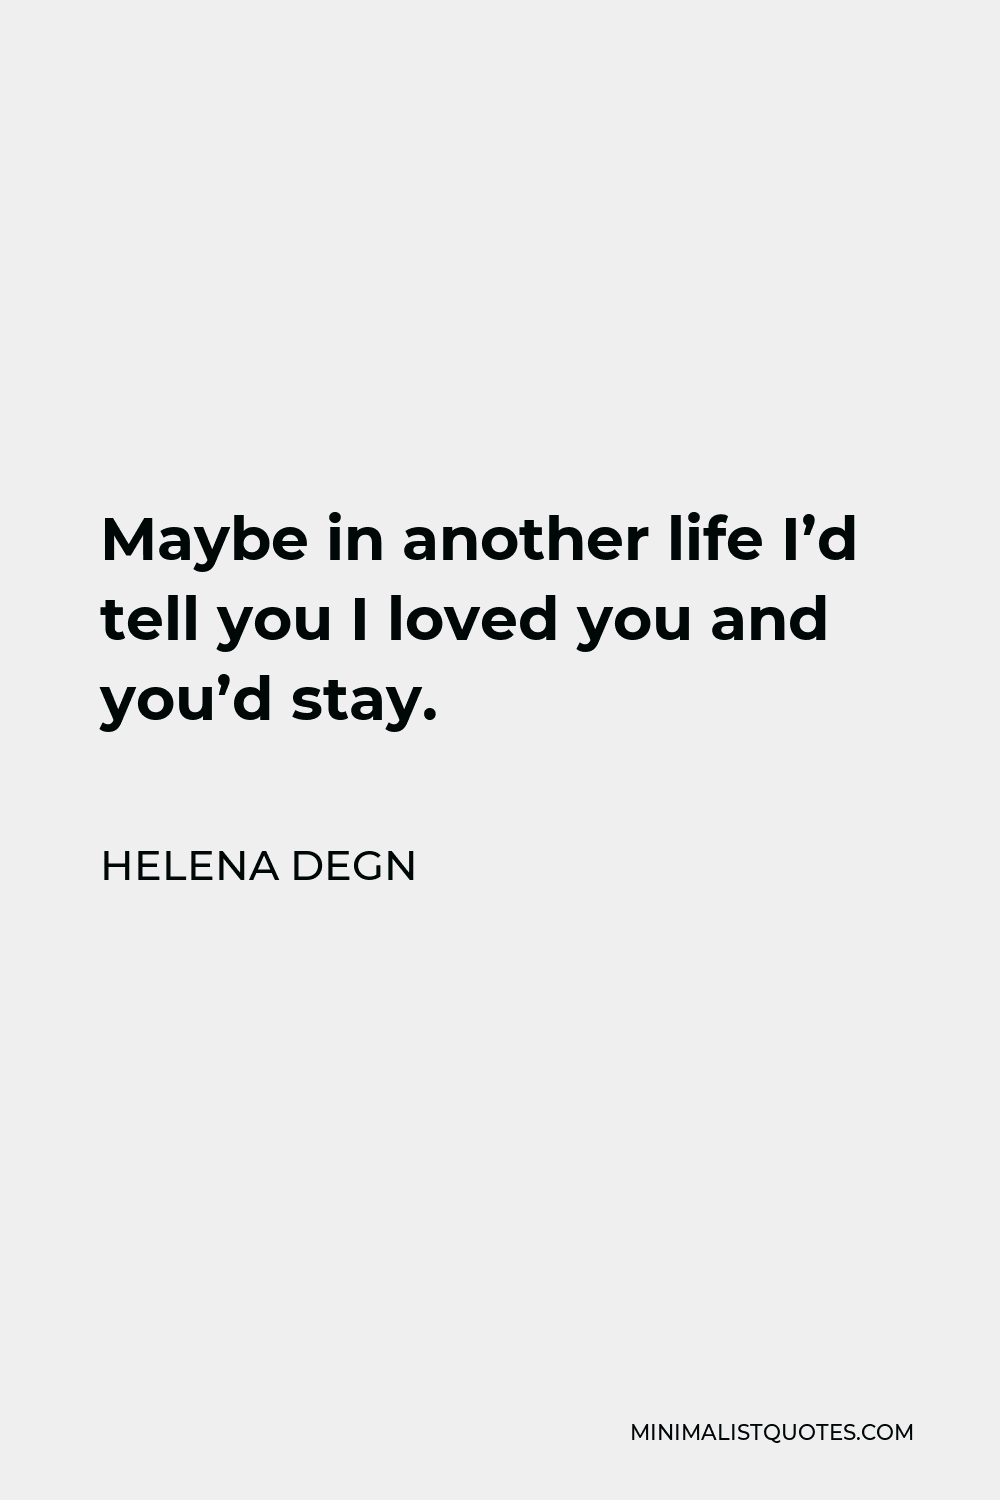 Helena Degn Quote - Maybe in another life I’d tell you I loved you and you’d stay.